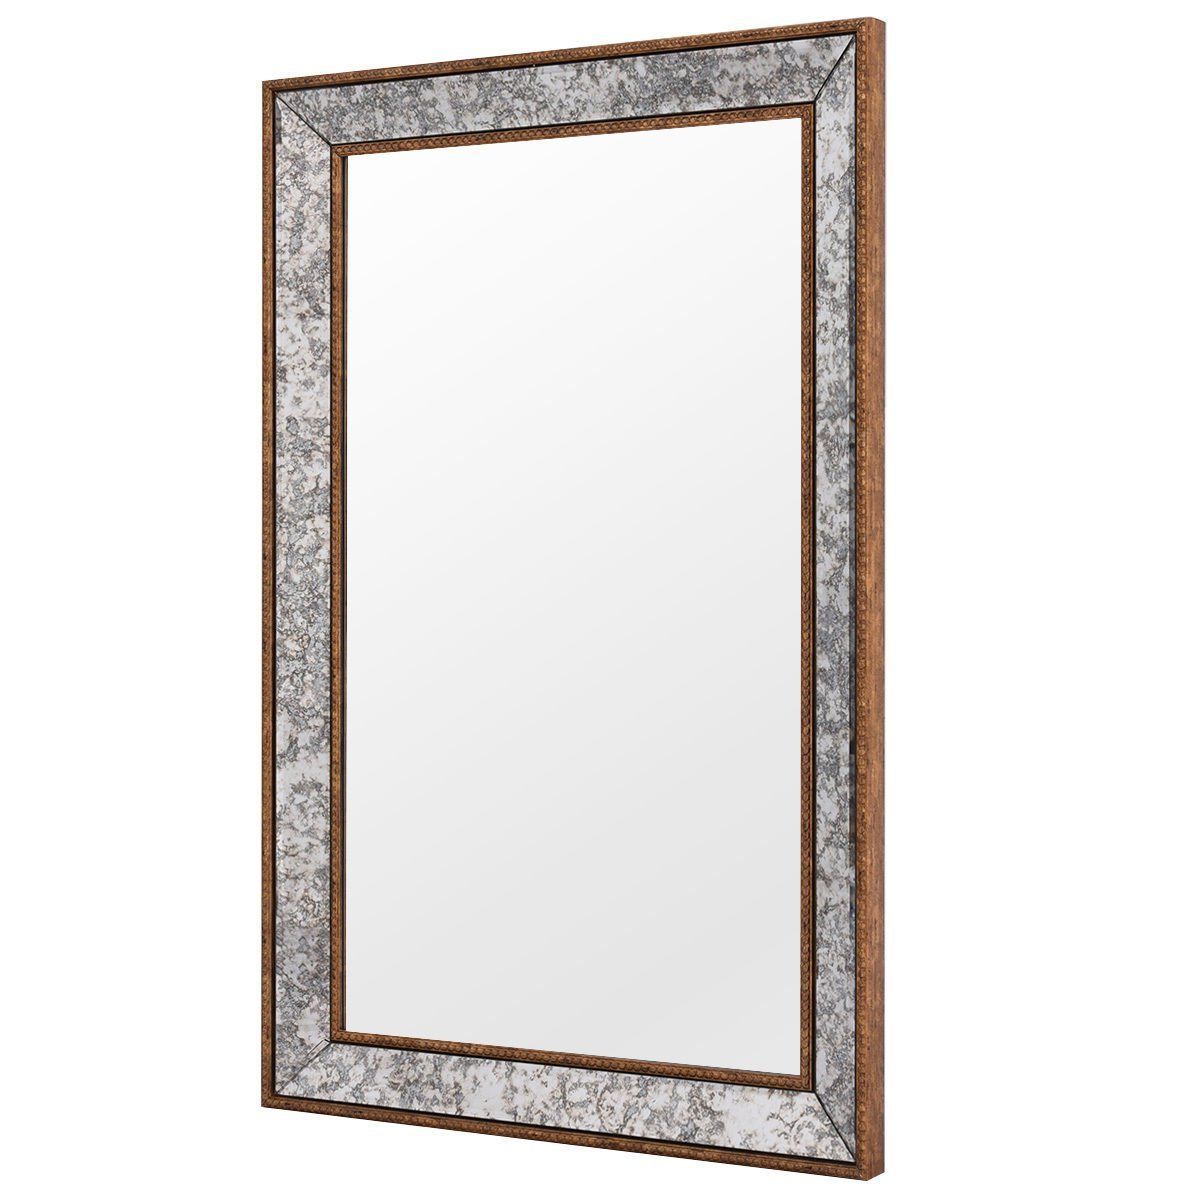 Rounded Cut Edge Wall Mirrors With Regard To Widely Used Tangkula 36' Wall Mirror Beveled Mirror Rectangle Bathroom Home Decor (View 10 of 15)